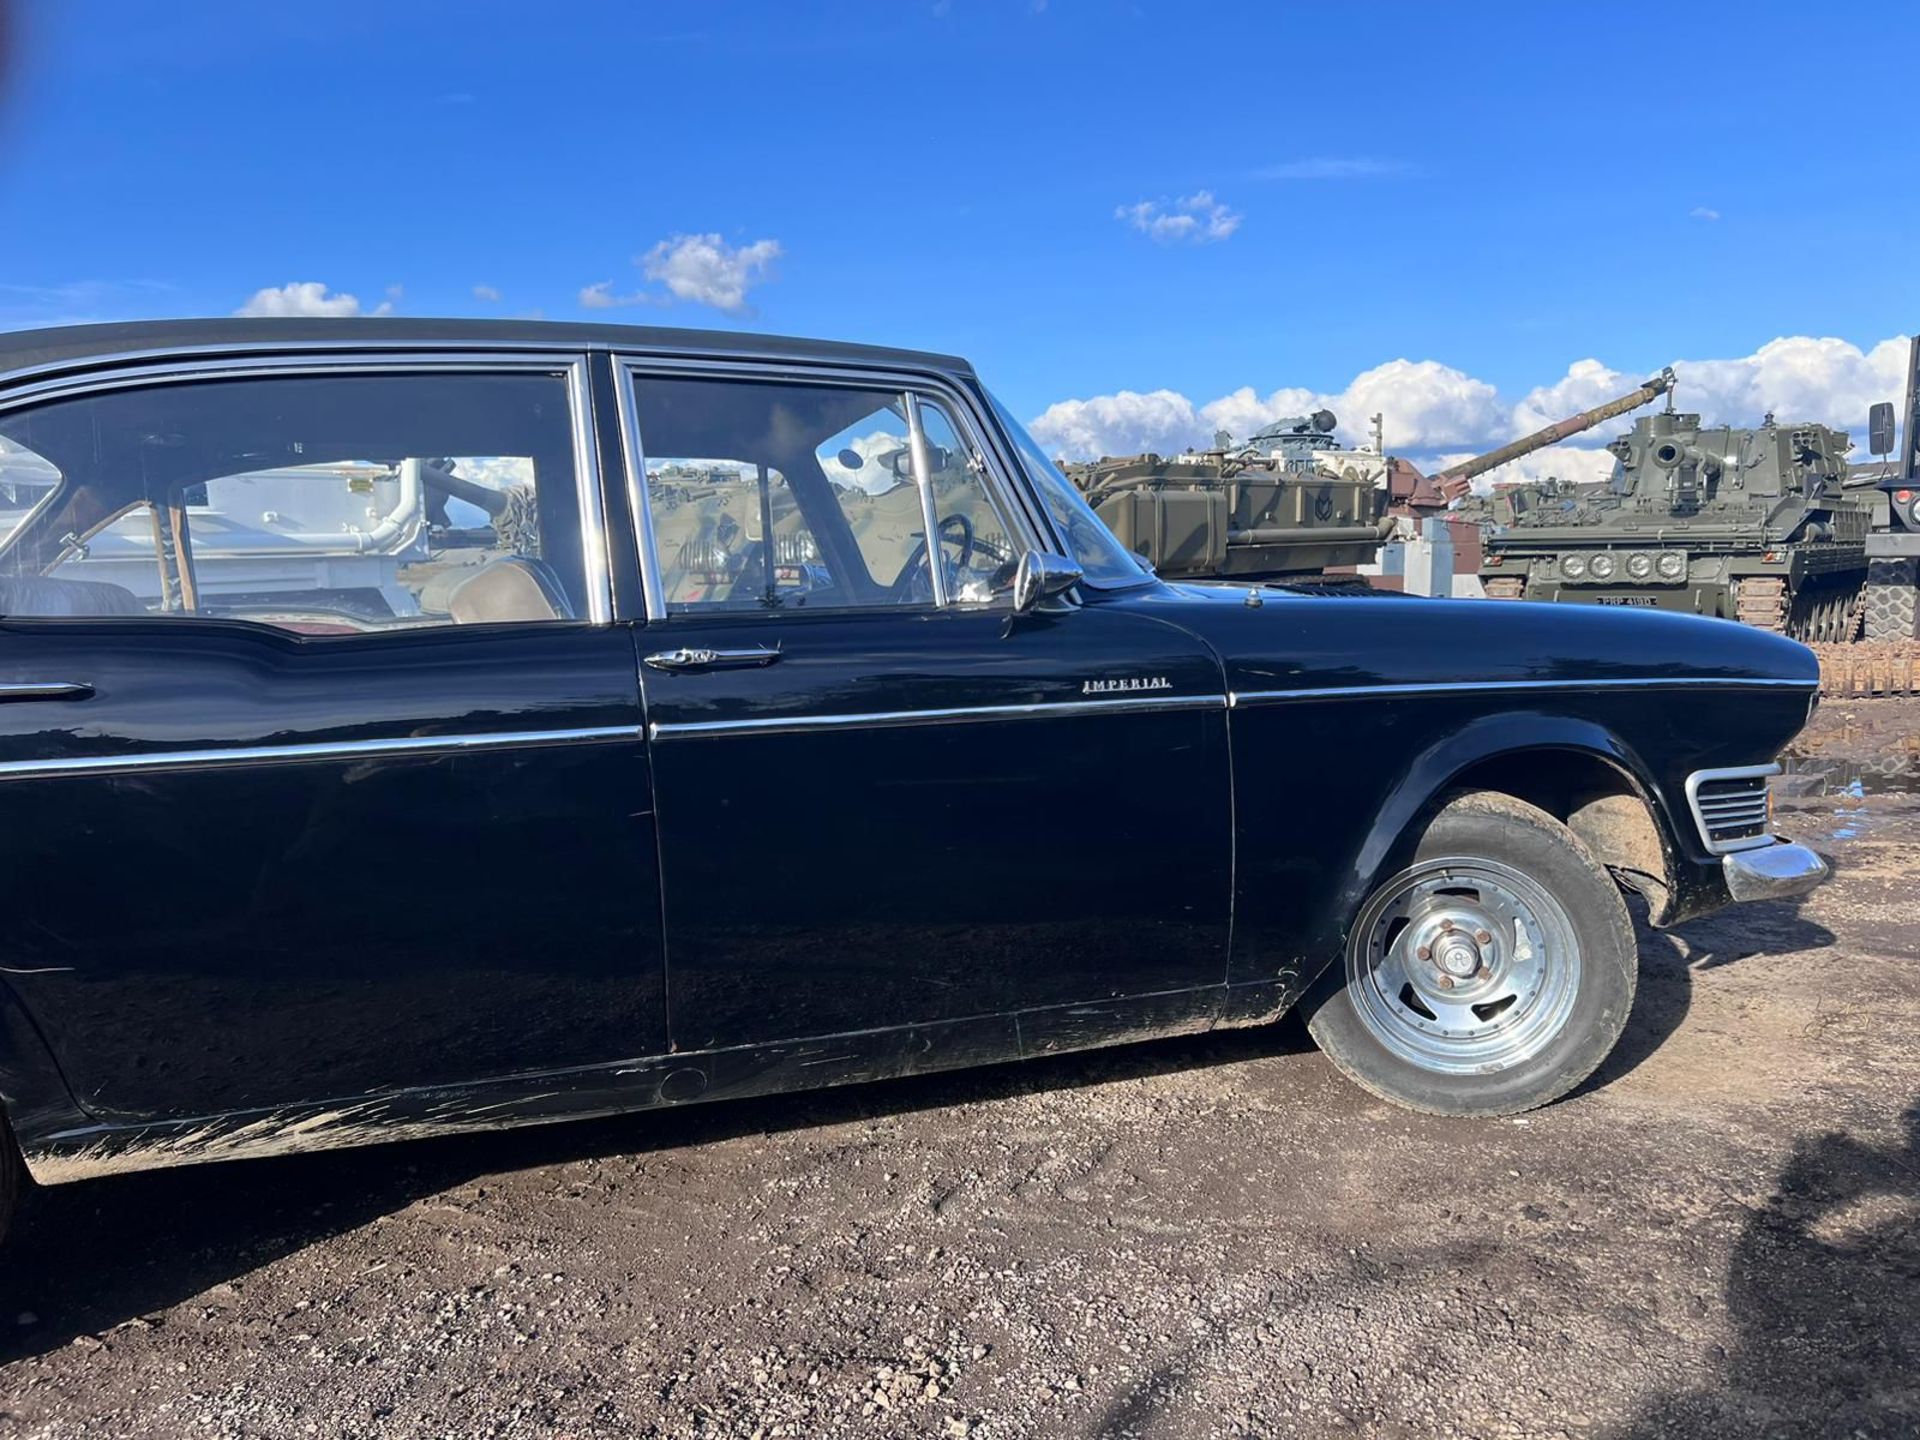 1965 Humber Imperial with a 6.75L Rolls Royce Shadow engine and gearbox - Image 6 of 24